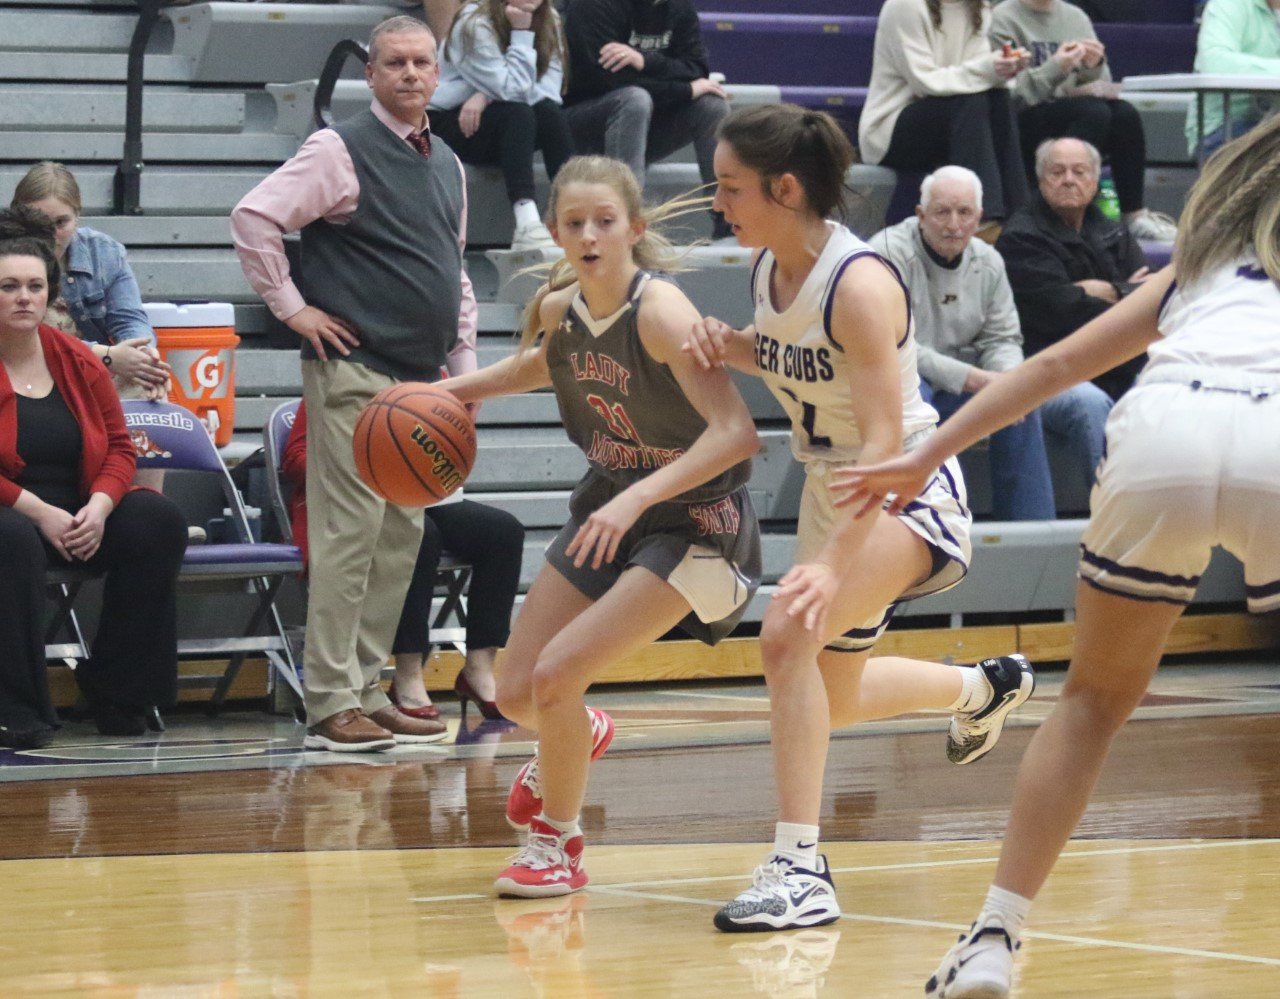 DeLorean Mason ended her breakout junior season scoring 18 points in Southmont's season-ending loss. Mason led the state in steals during the regular season with 6.7 a game.